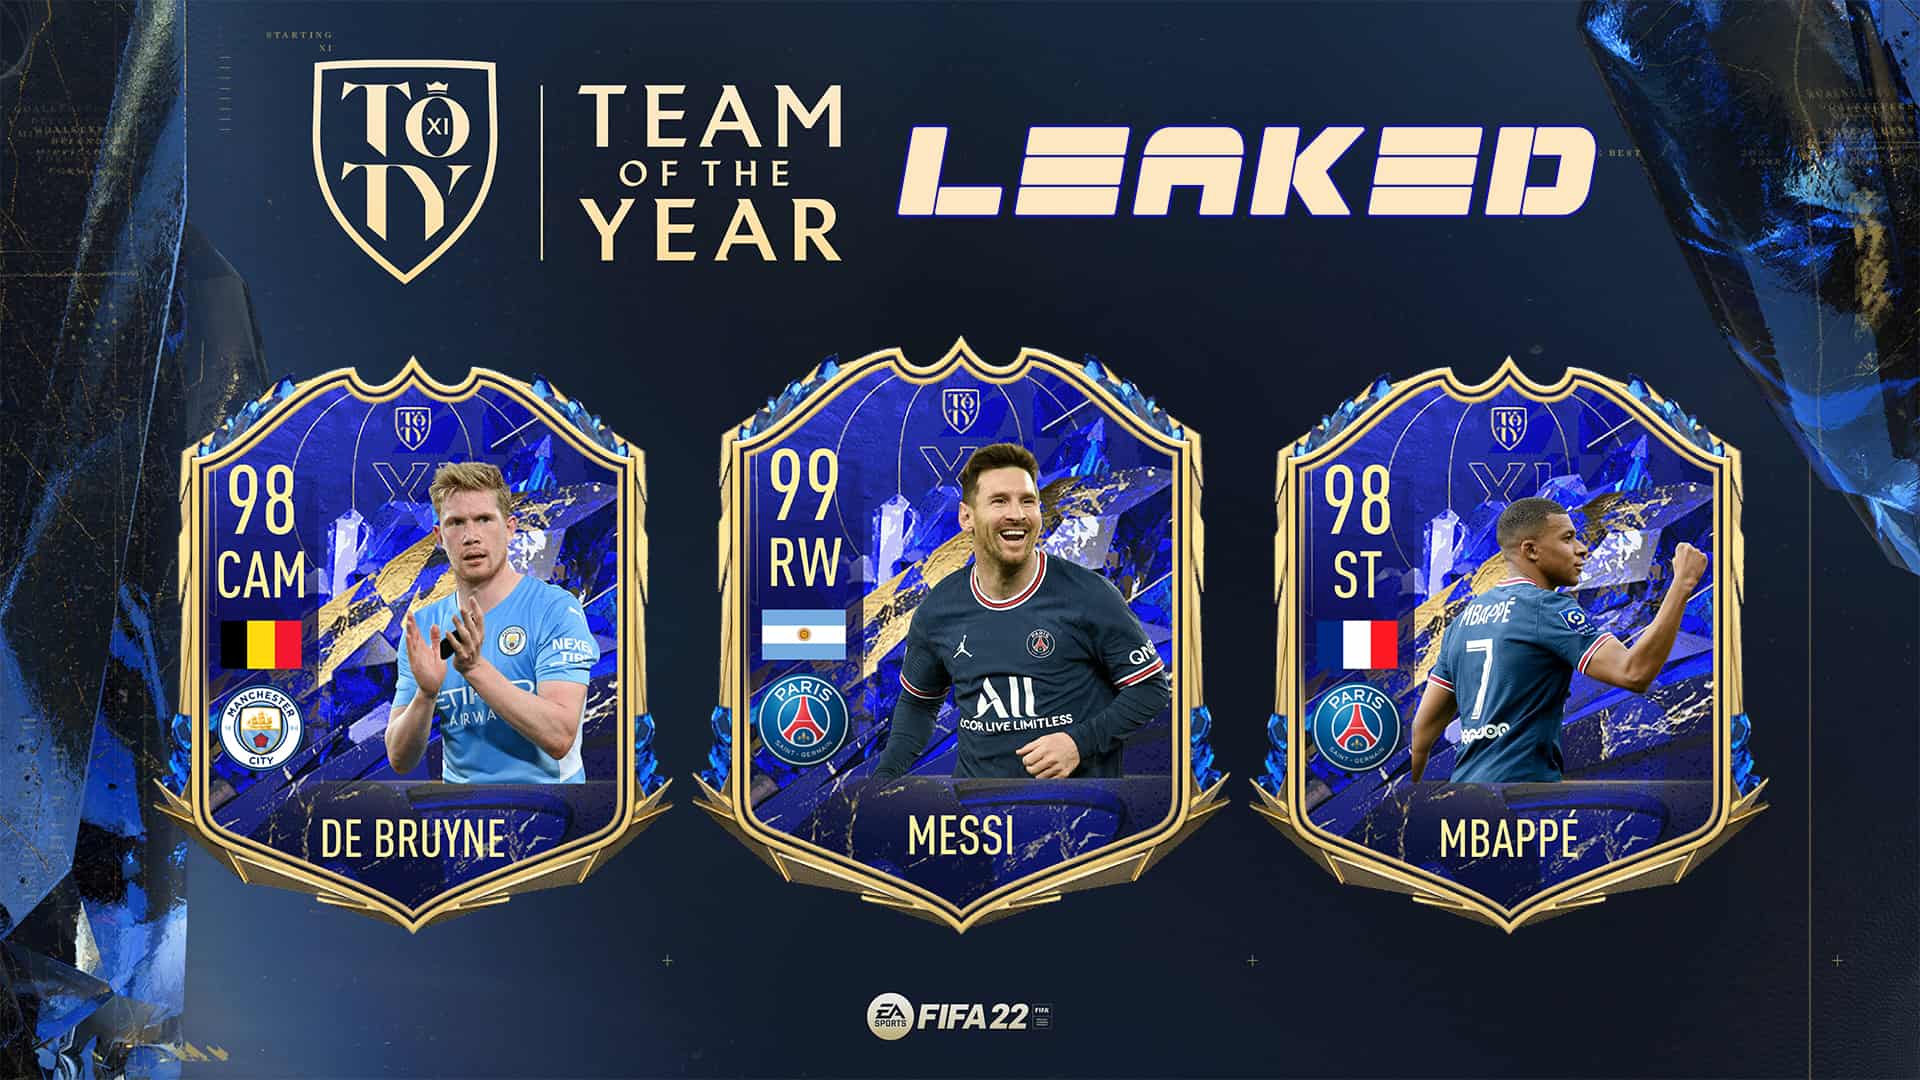 sake enclosure Mysterious FIFA 22 TOTY Leak - These players are already known - Global Esport News